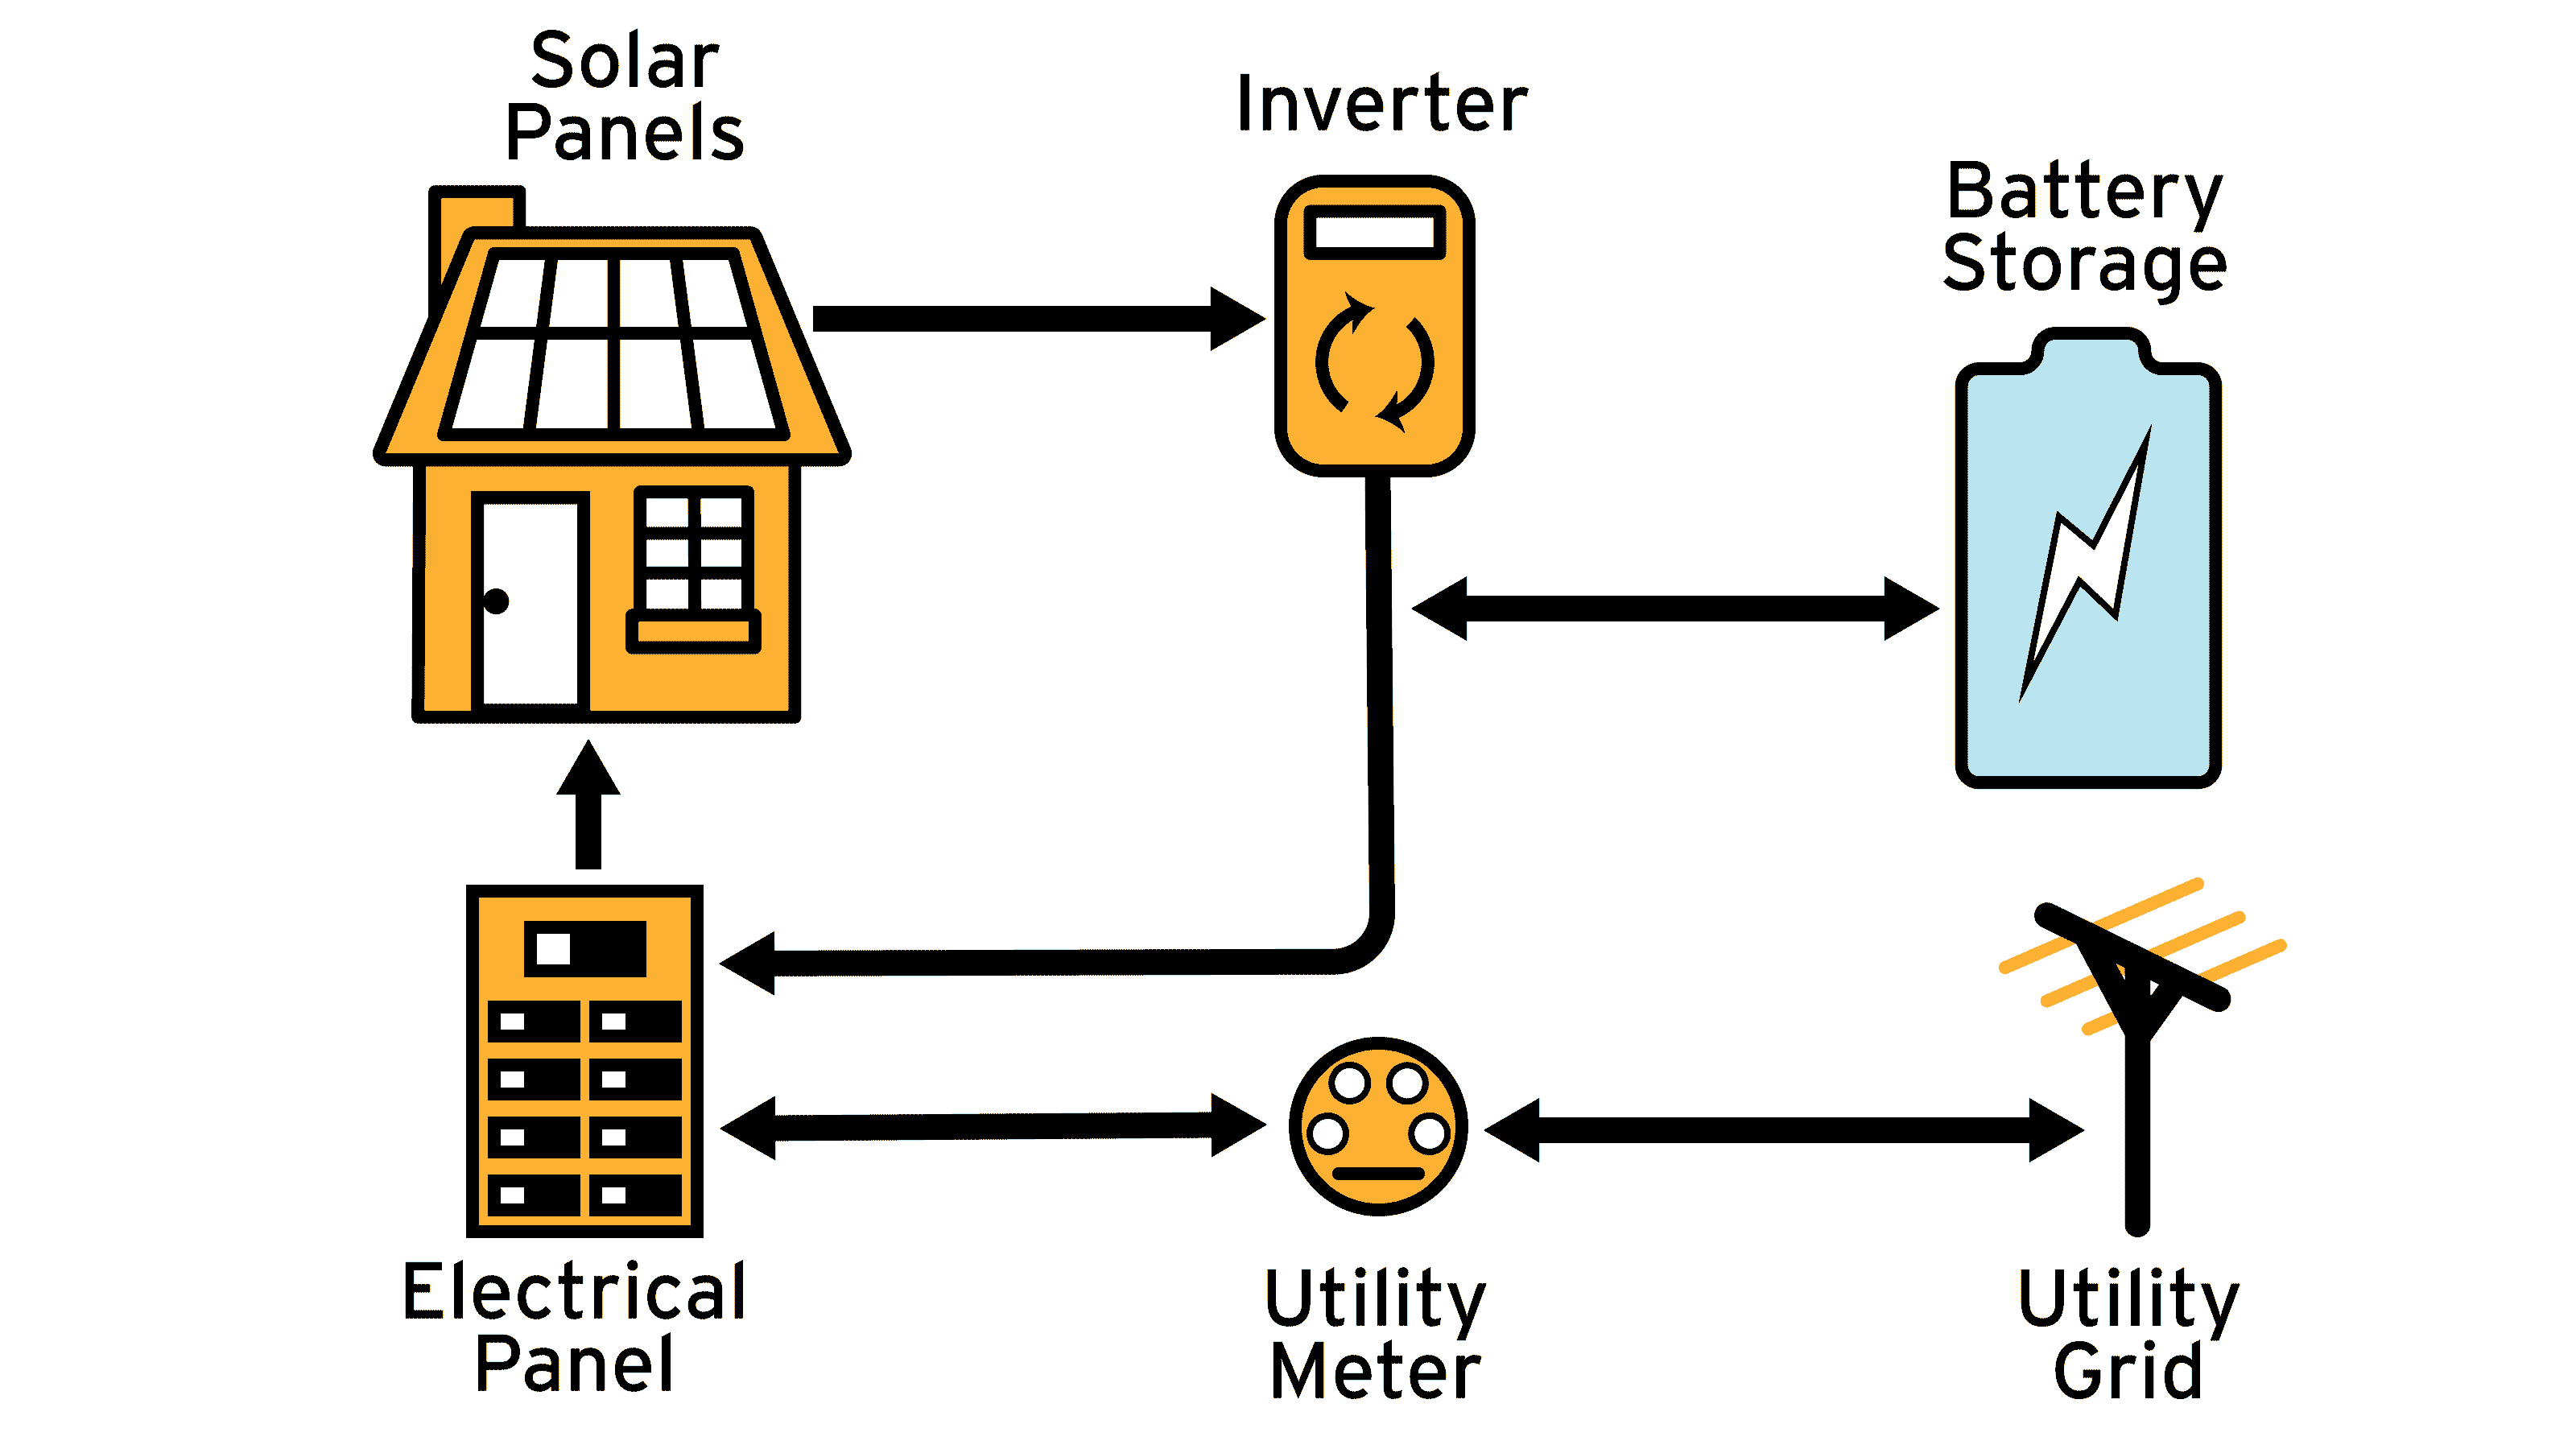 Should I Get Battery Storage for My Solar Energy System